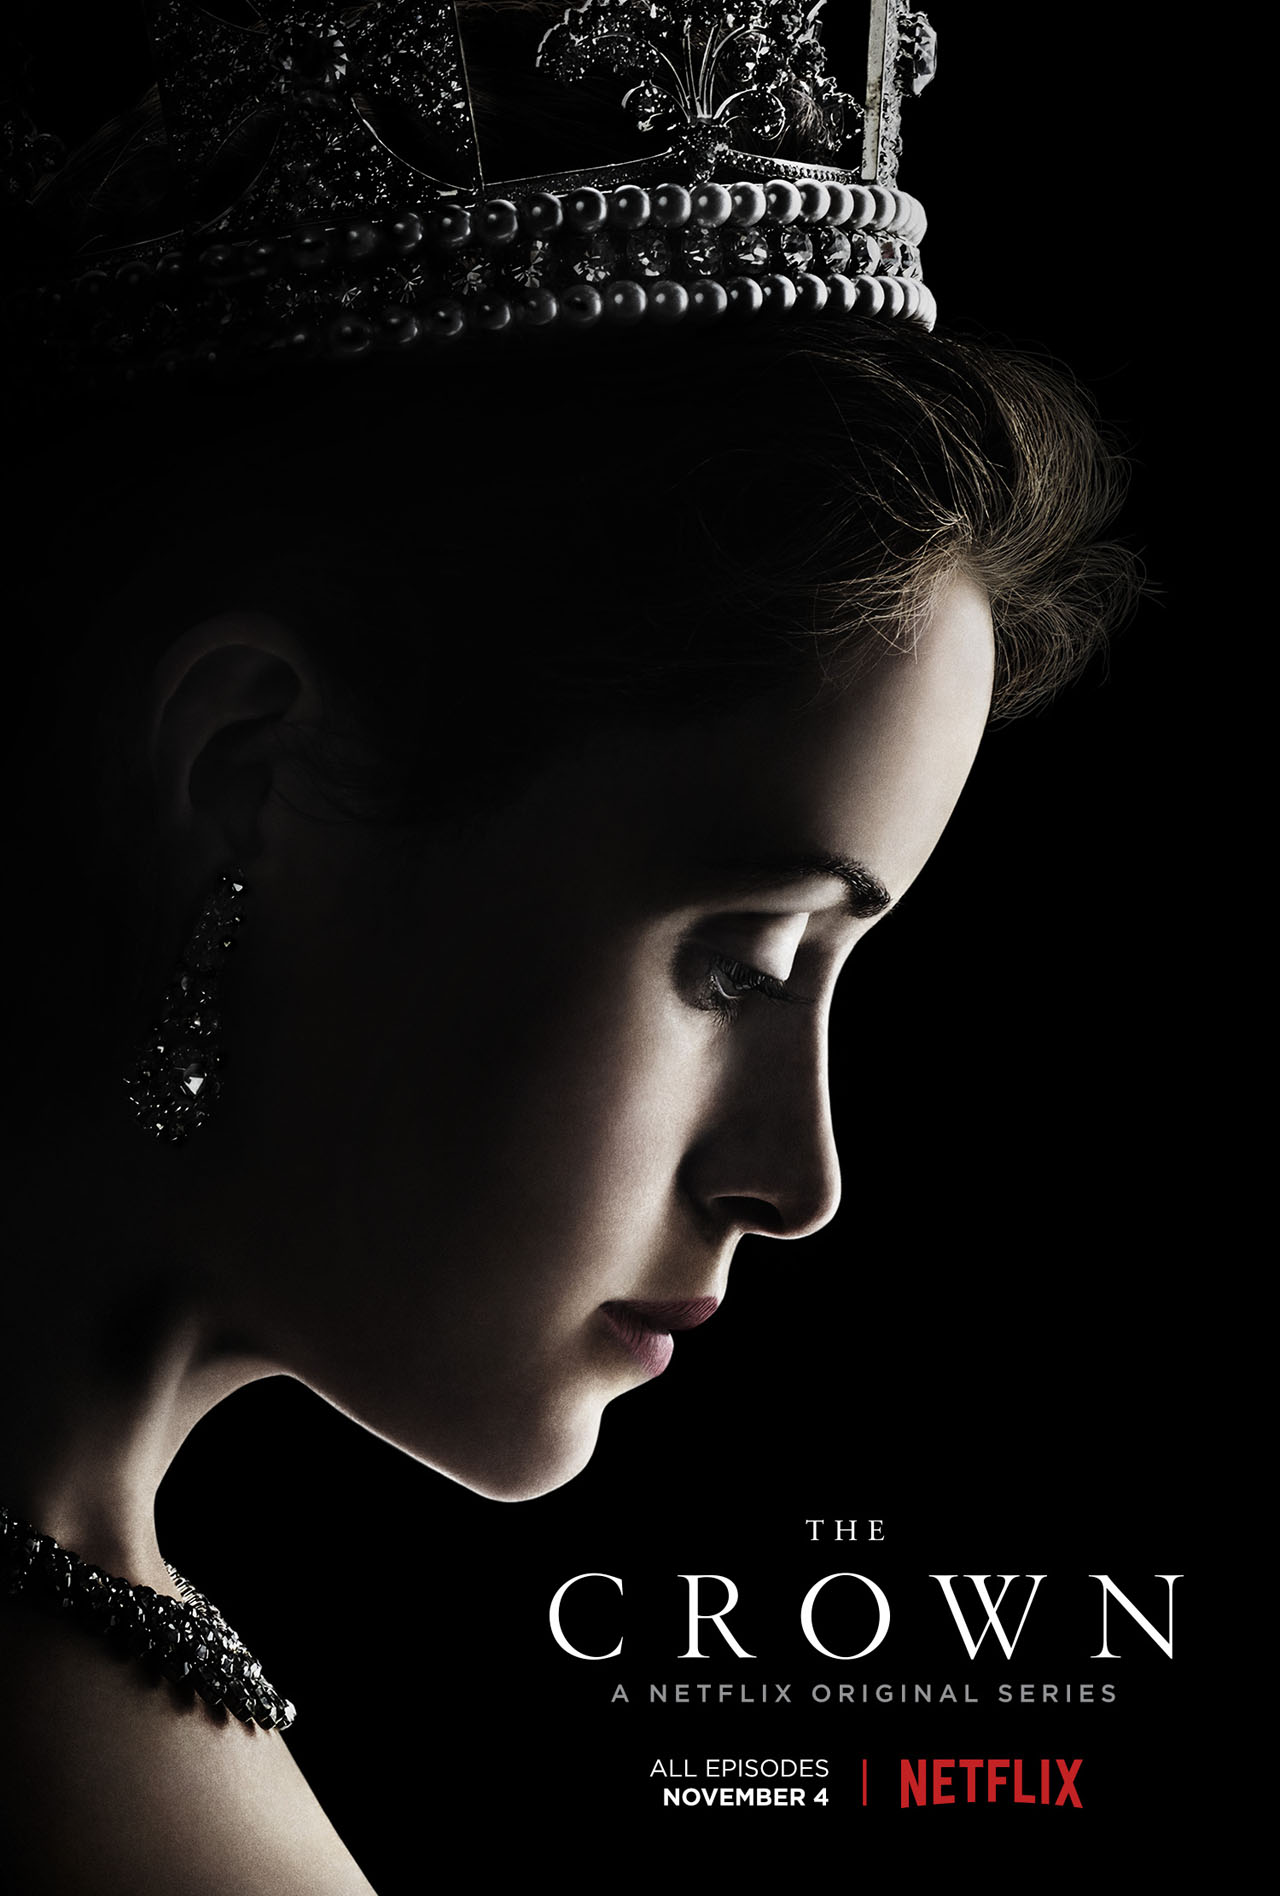 Barb: The Crown